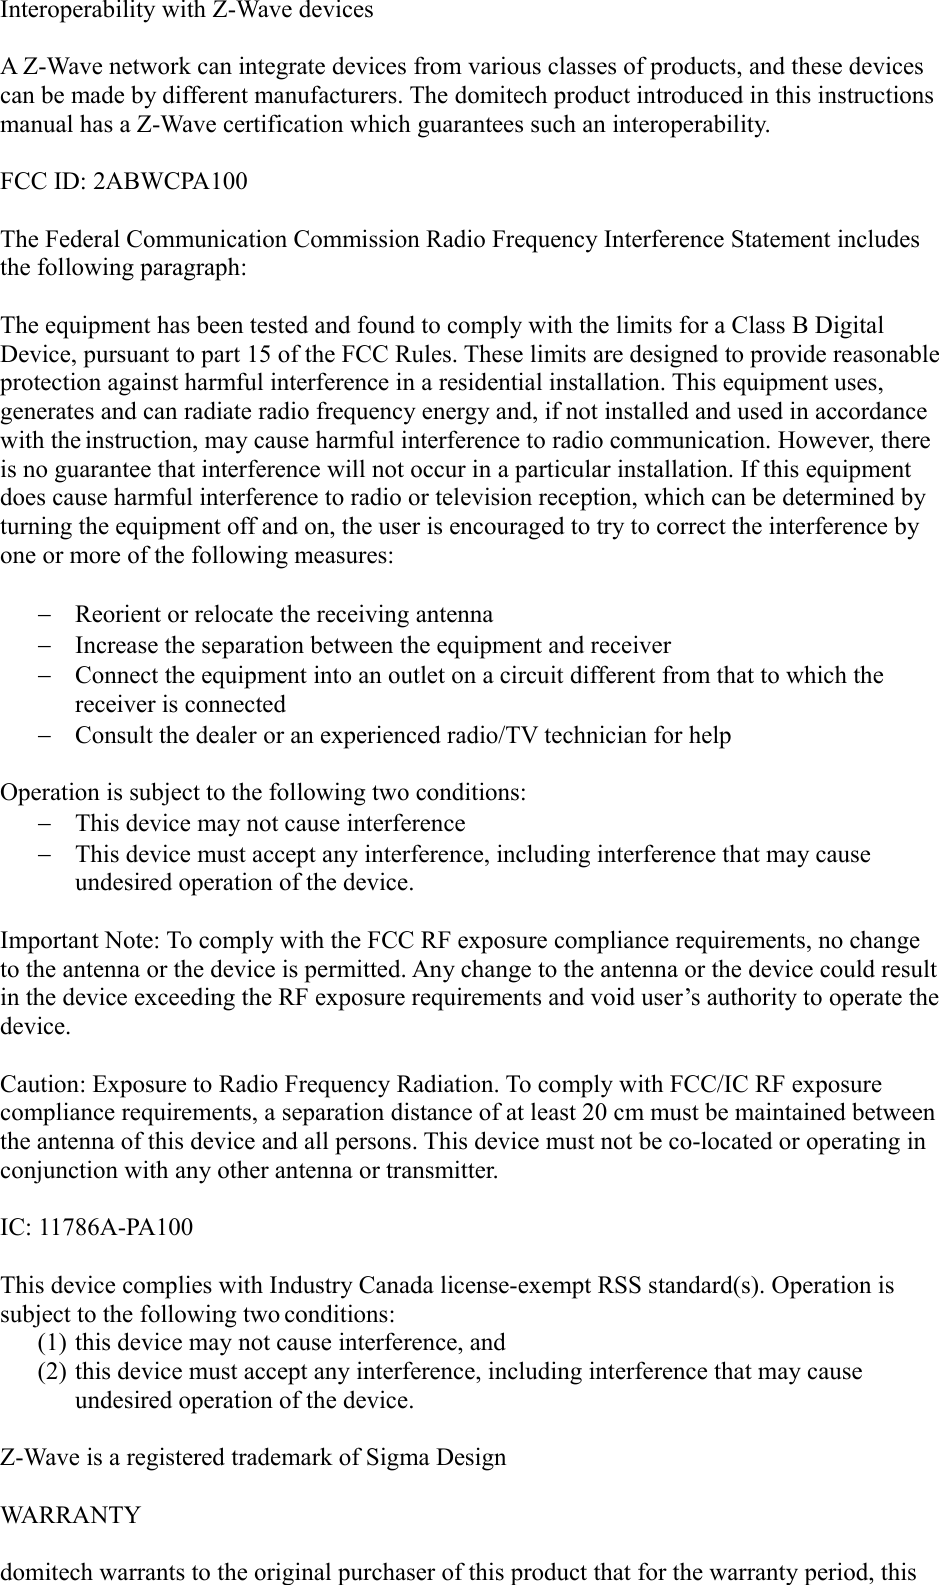 Interoperability with Z-Wave devicesA Z-Wave network can integrate devices from various classes of products, and these devices can be made by different manufacturers. The domitech product introduced in this instructions manual has a Z-Wave certification which guarantees such an interoperability. FCC ID: 2ABWCPA100The Federal Communication Commission Radio Frequency Interference Statement includes the following paragraph:The equipment has been tested and found to comply with the limits for a Class B Digital Device, pursuant to part 15 of the FCC Rules. These limits are designed to provide reasonableprotection against harmful interference in a residential installation. This equipment uses, generates and can radiate radio frequency energy and, if not installed and used in accordance with the instruction, may cause harmful interference to radio communication. However, there is no guarantee that interference will not occur in a particular installation. If this equipment does cause harmful interference to radio or television reception, which can be determined by turning the equipment off and on, the user is encouraged to try to correct the interference by one or more of the following measures:Reorient or relocate the receiving antennaIncrease the separation between the equipment and receiverConnect the equipment into an outlet on a circuit different from that to which the receiver is connectedConsult the dealer or an experienced radio/TV technician for helpOperation is subject to the following two conditions:This device may not cause interferenceThis device must accept any interference, including interference that may cause undesired operation of the device.Important Note: To comply with the FCC RF exposure compliance requirements, no change to the antenna or the device is permitted. Any change to the antenna or the device could resultin the device exceeding the RF exposure requirements and void user’s authority to operate thedevice.Caution: Exposure to Radio Frequency Radiation. To comply with FCC/IC RF exposure compliance requirements, a separation distance of at least 20 cm must be maintained betweenthe antenna of this device and all persons. This device must not be co-located or operating in conjunction with any other antenna or transmitter.IC: 11786A-PA100This device complies with Industry Canada license-exempt RSS standard(s). Operation is subject to the following two conditions: (1) this device may not cause interference, and(2) this device must accept any interference, including interference that may cause undesired operation of the device.Z-Wave is a registered trademark of Sigma DesignWARRANTYdomitech warrants to the original purchaser of this product that for the warranty period, this 